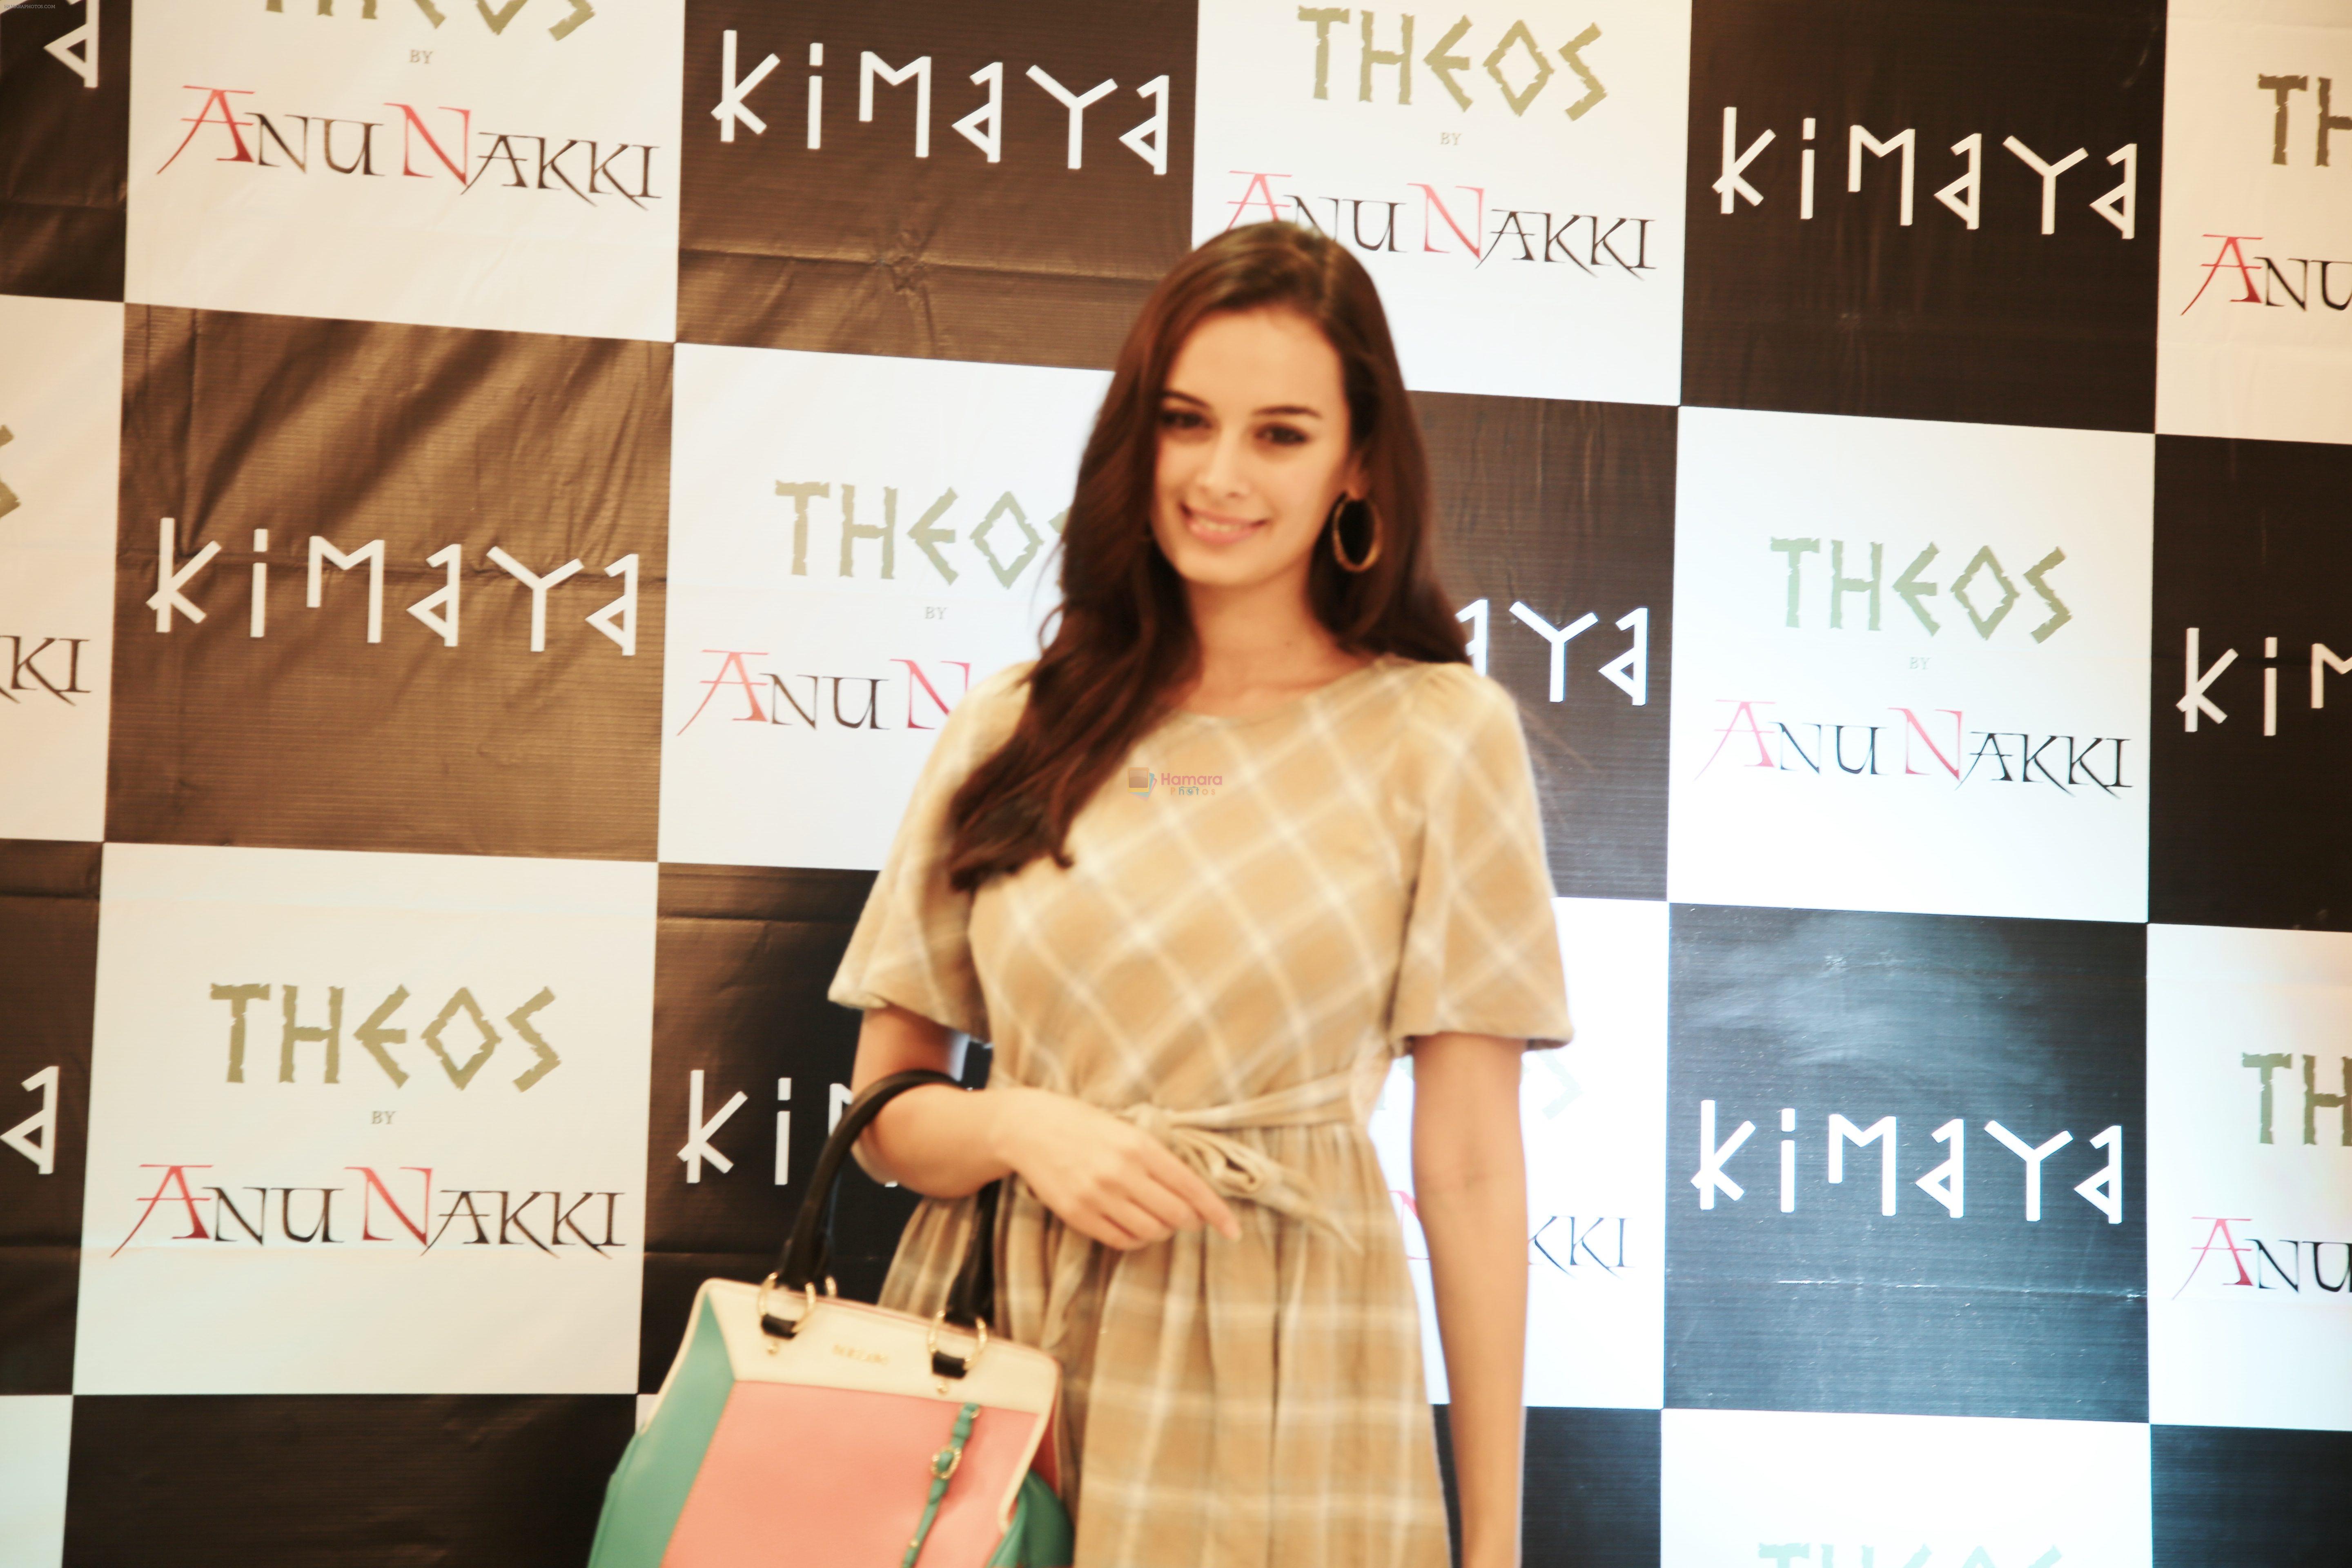 Evleny Sharma attends launch of Ancient Greece inspired fashion 2014 collection THEOS at Kimaya